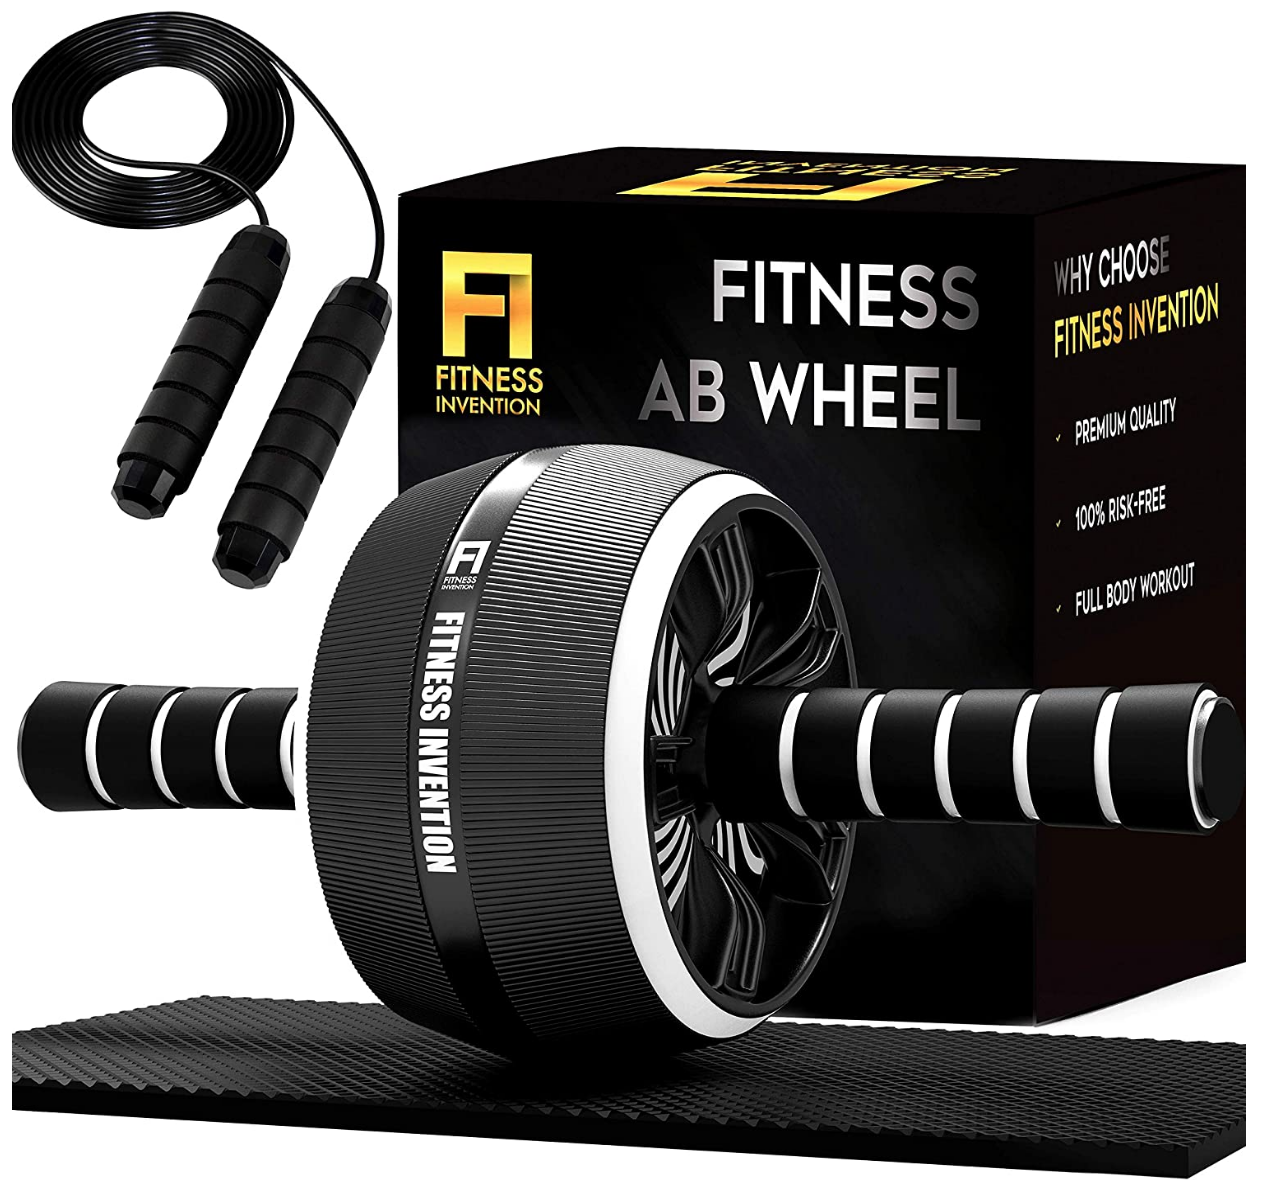 Bk Sports Fitness Invention Ab Roller Wheel – 3-IN-1 Ab Wheel Roller Review